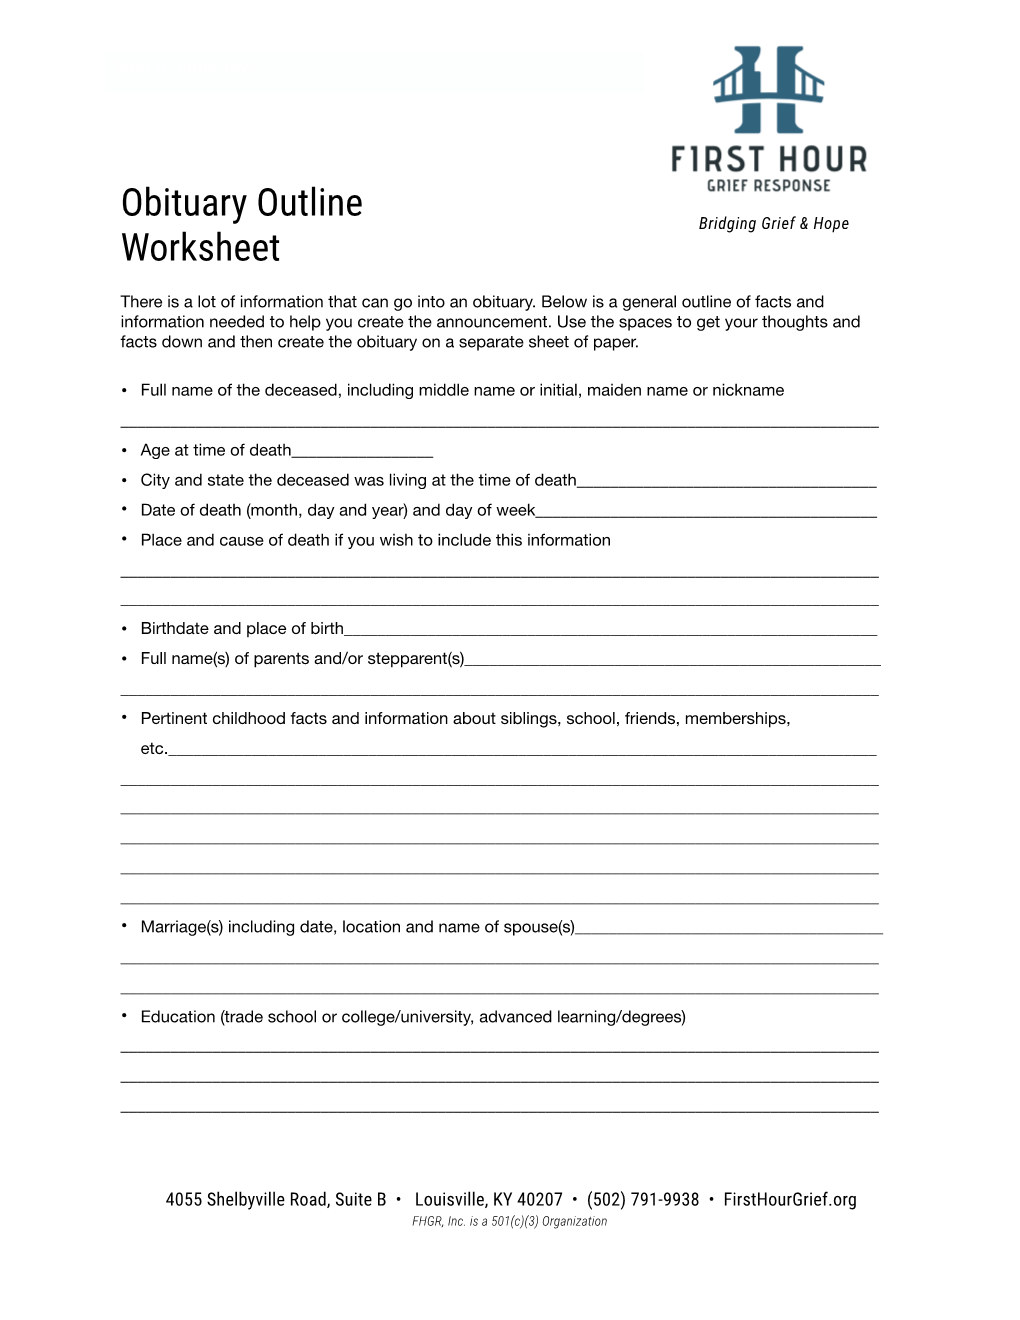 Obituary Outline Worksheet First Hour Grief Response, Inc